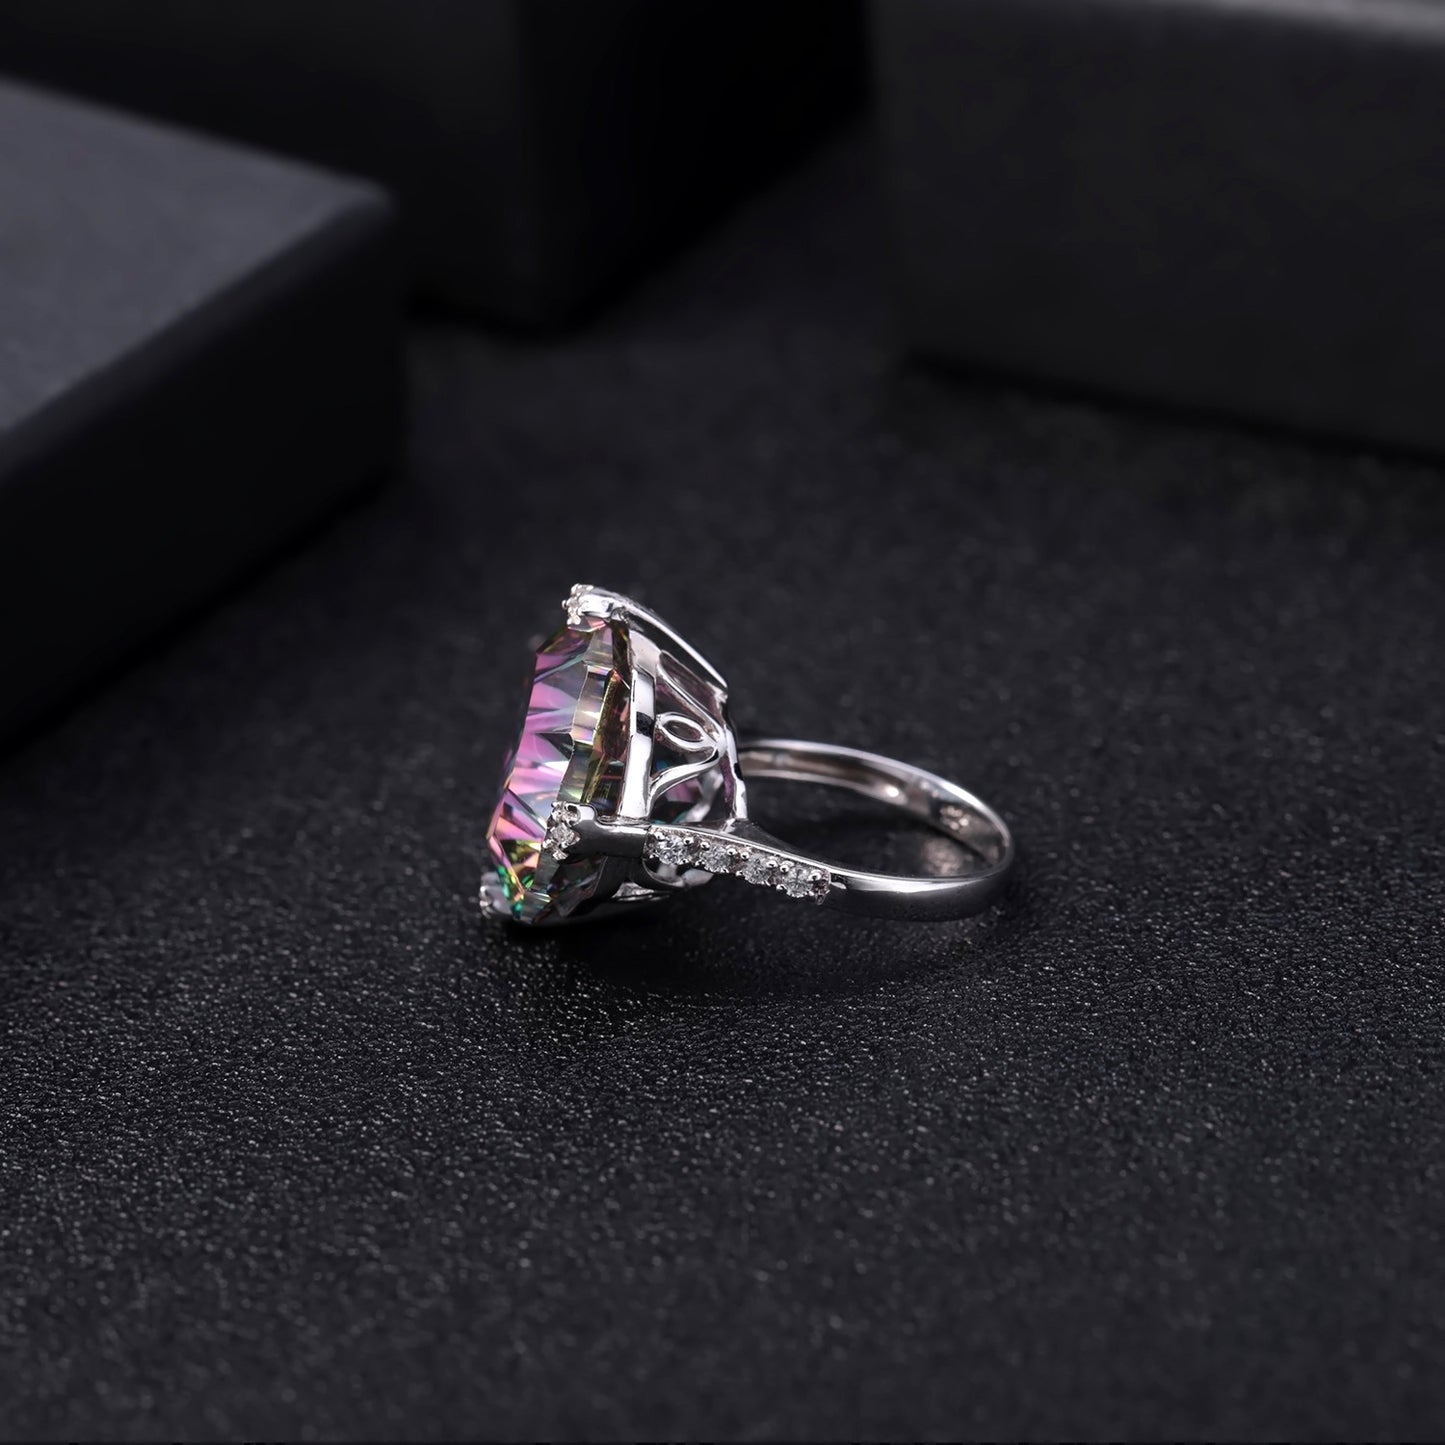 Luxury S925 Silver Colored Crystal Ring for Women